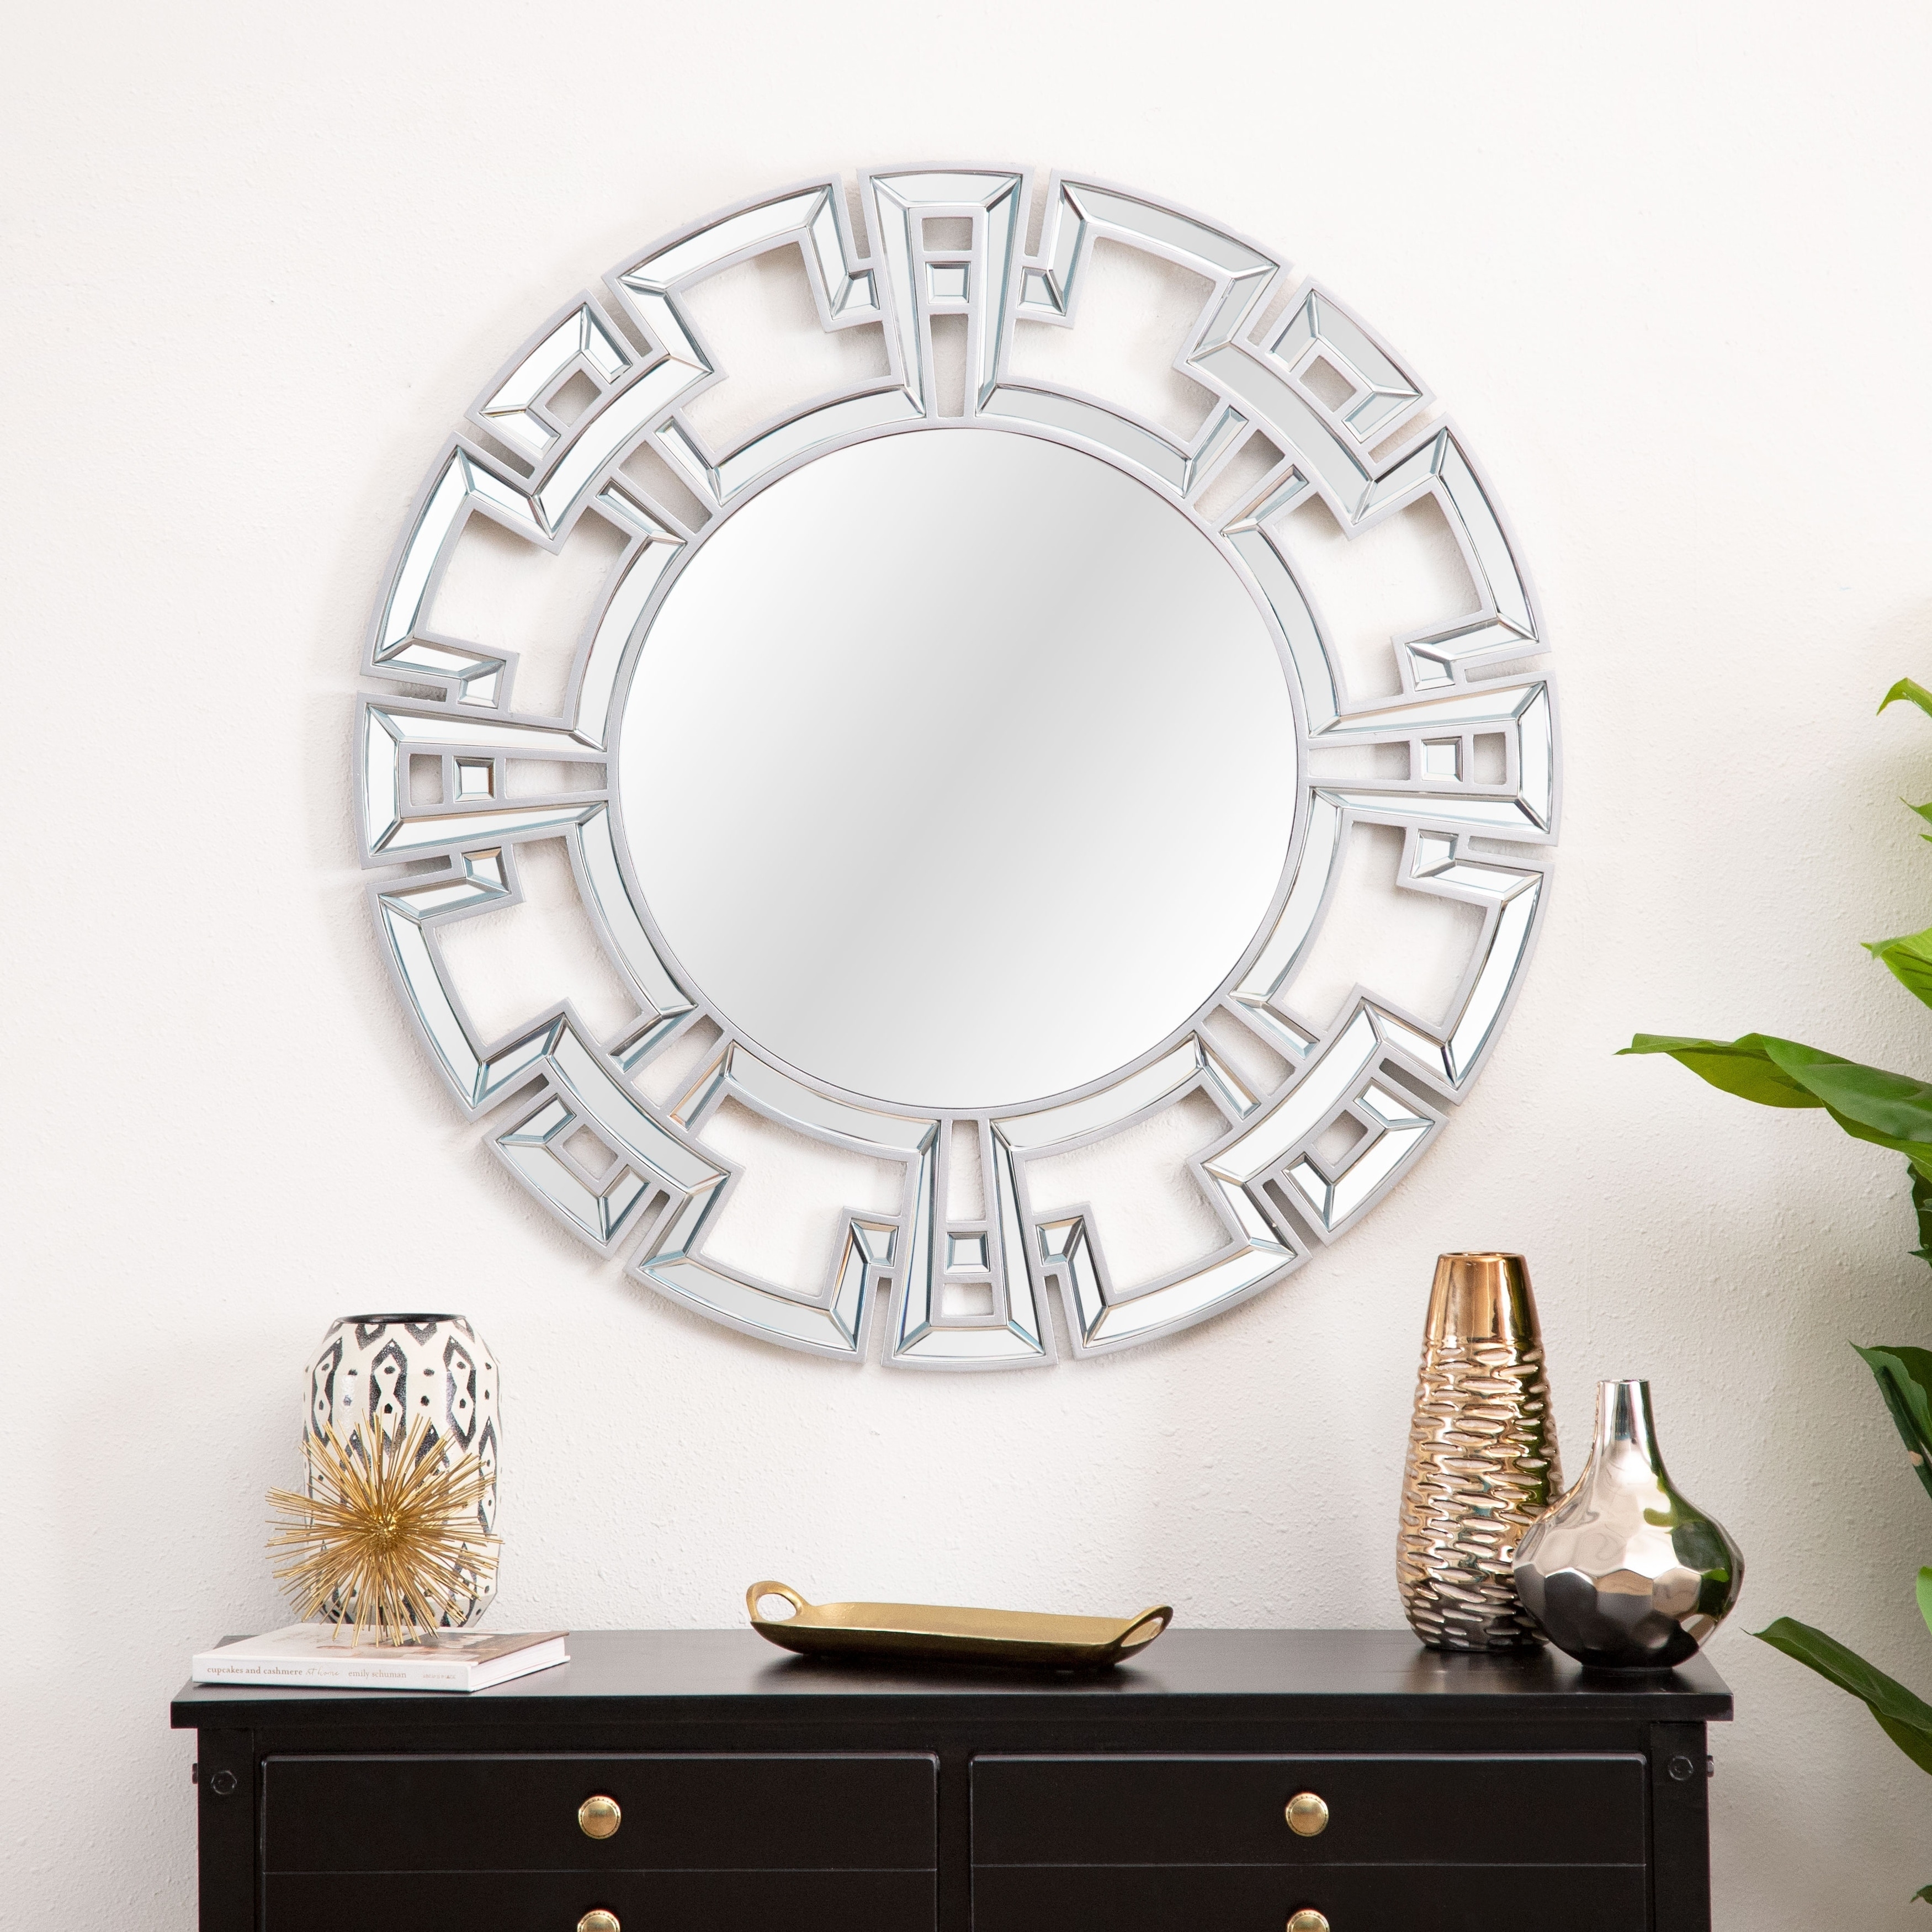 Abbyson Living Pierre Silver Round Wall Mirror (SilverMaterials Glass/woodCare Dust all non mirror surfaces with a dry, soft, cloth. Clean mirrored surfaces with glass cleanerDimensions 35.5 inches diameter x .8 inches deep )